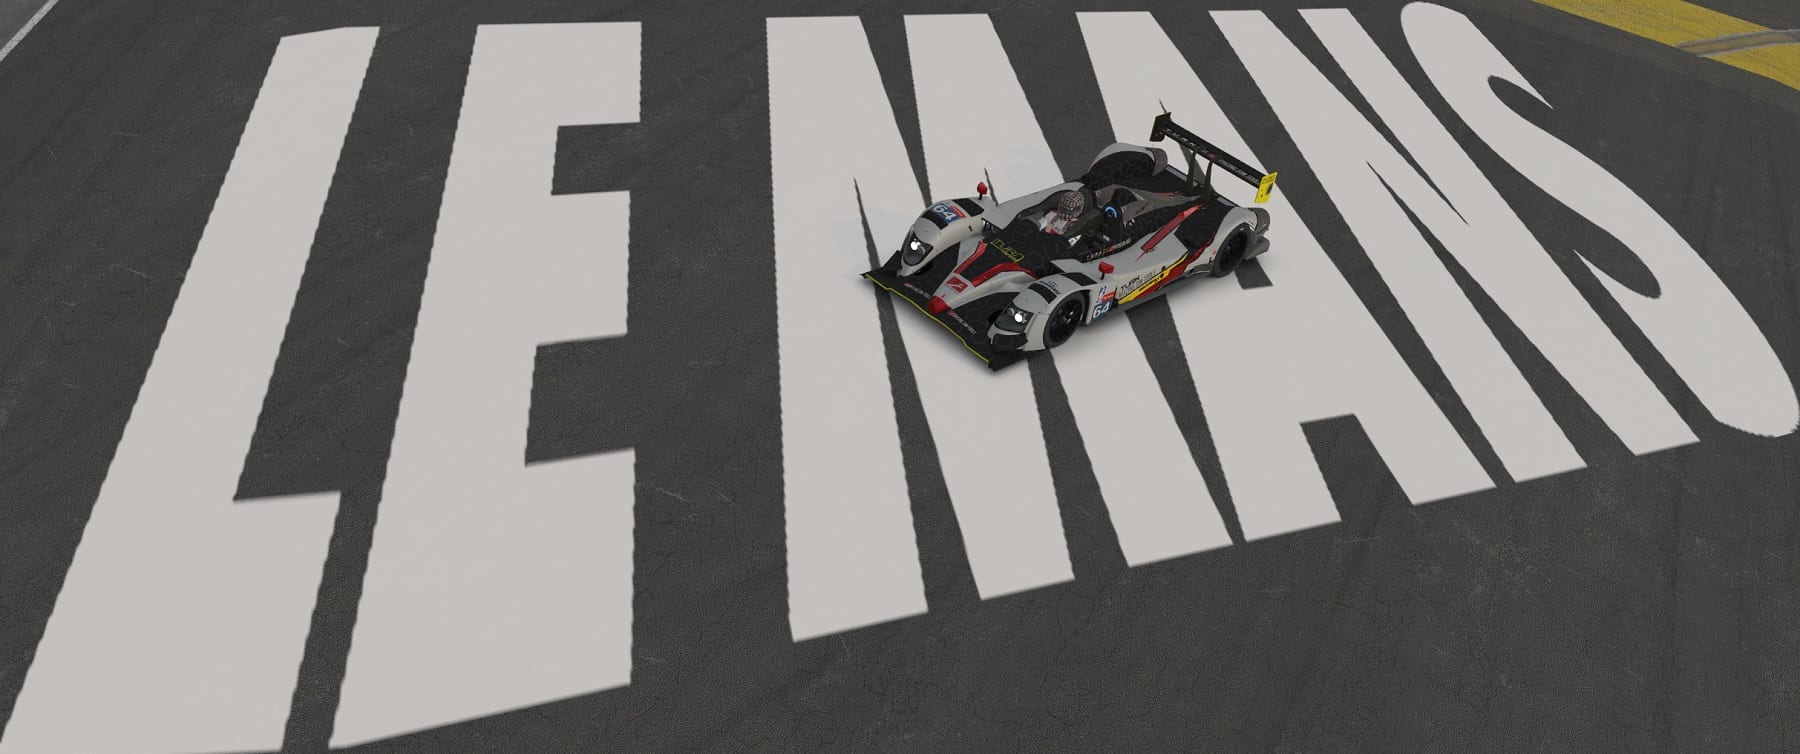 iracing le mans